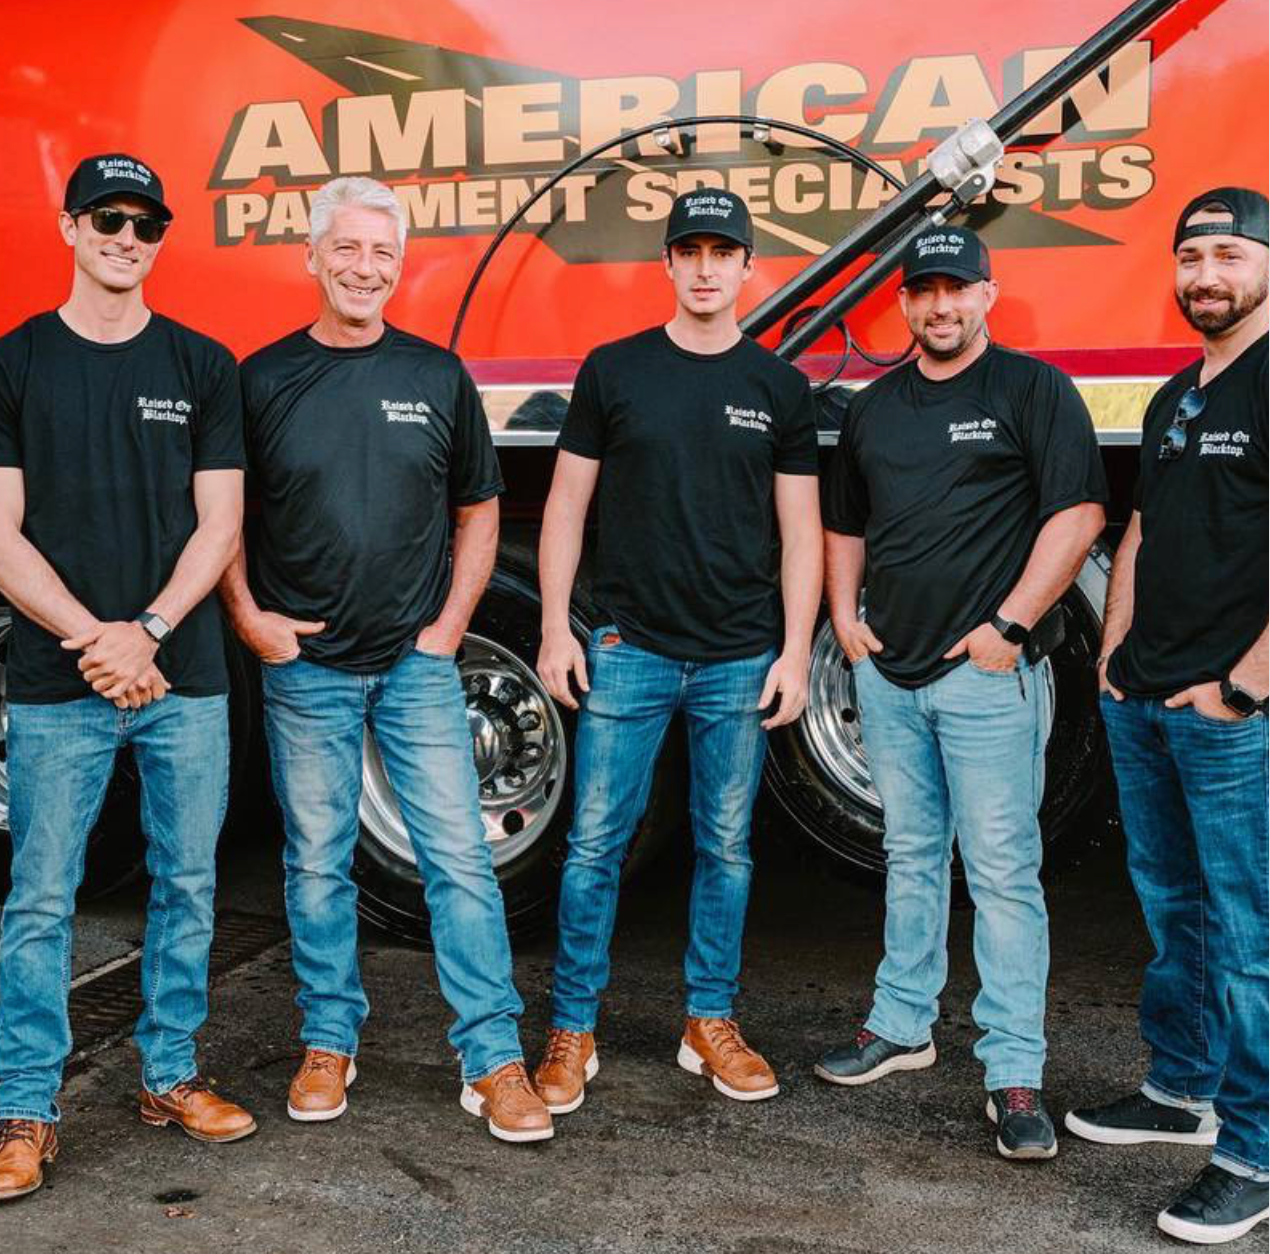 The Stanley family members of American Pavement Specialists, from left, Josh Stanley, Bill Stanley Jr., Matt Stanley, Bill Stanley III and Jack Stanley.